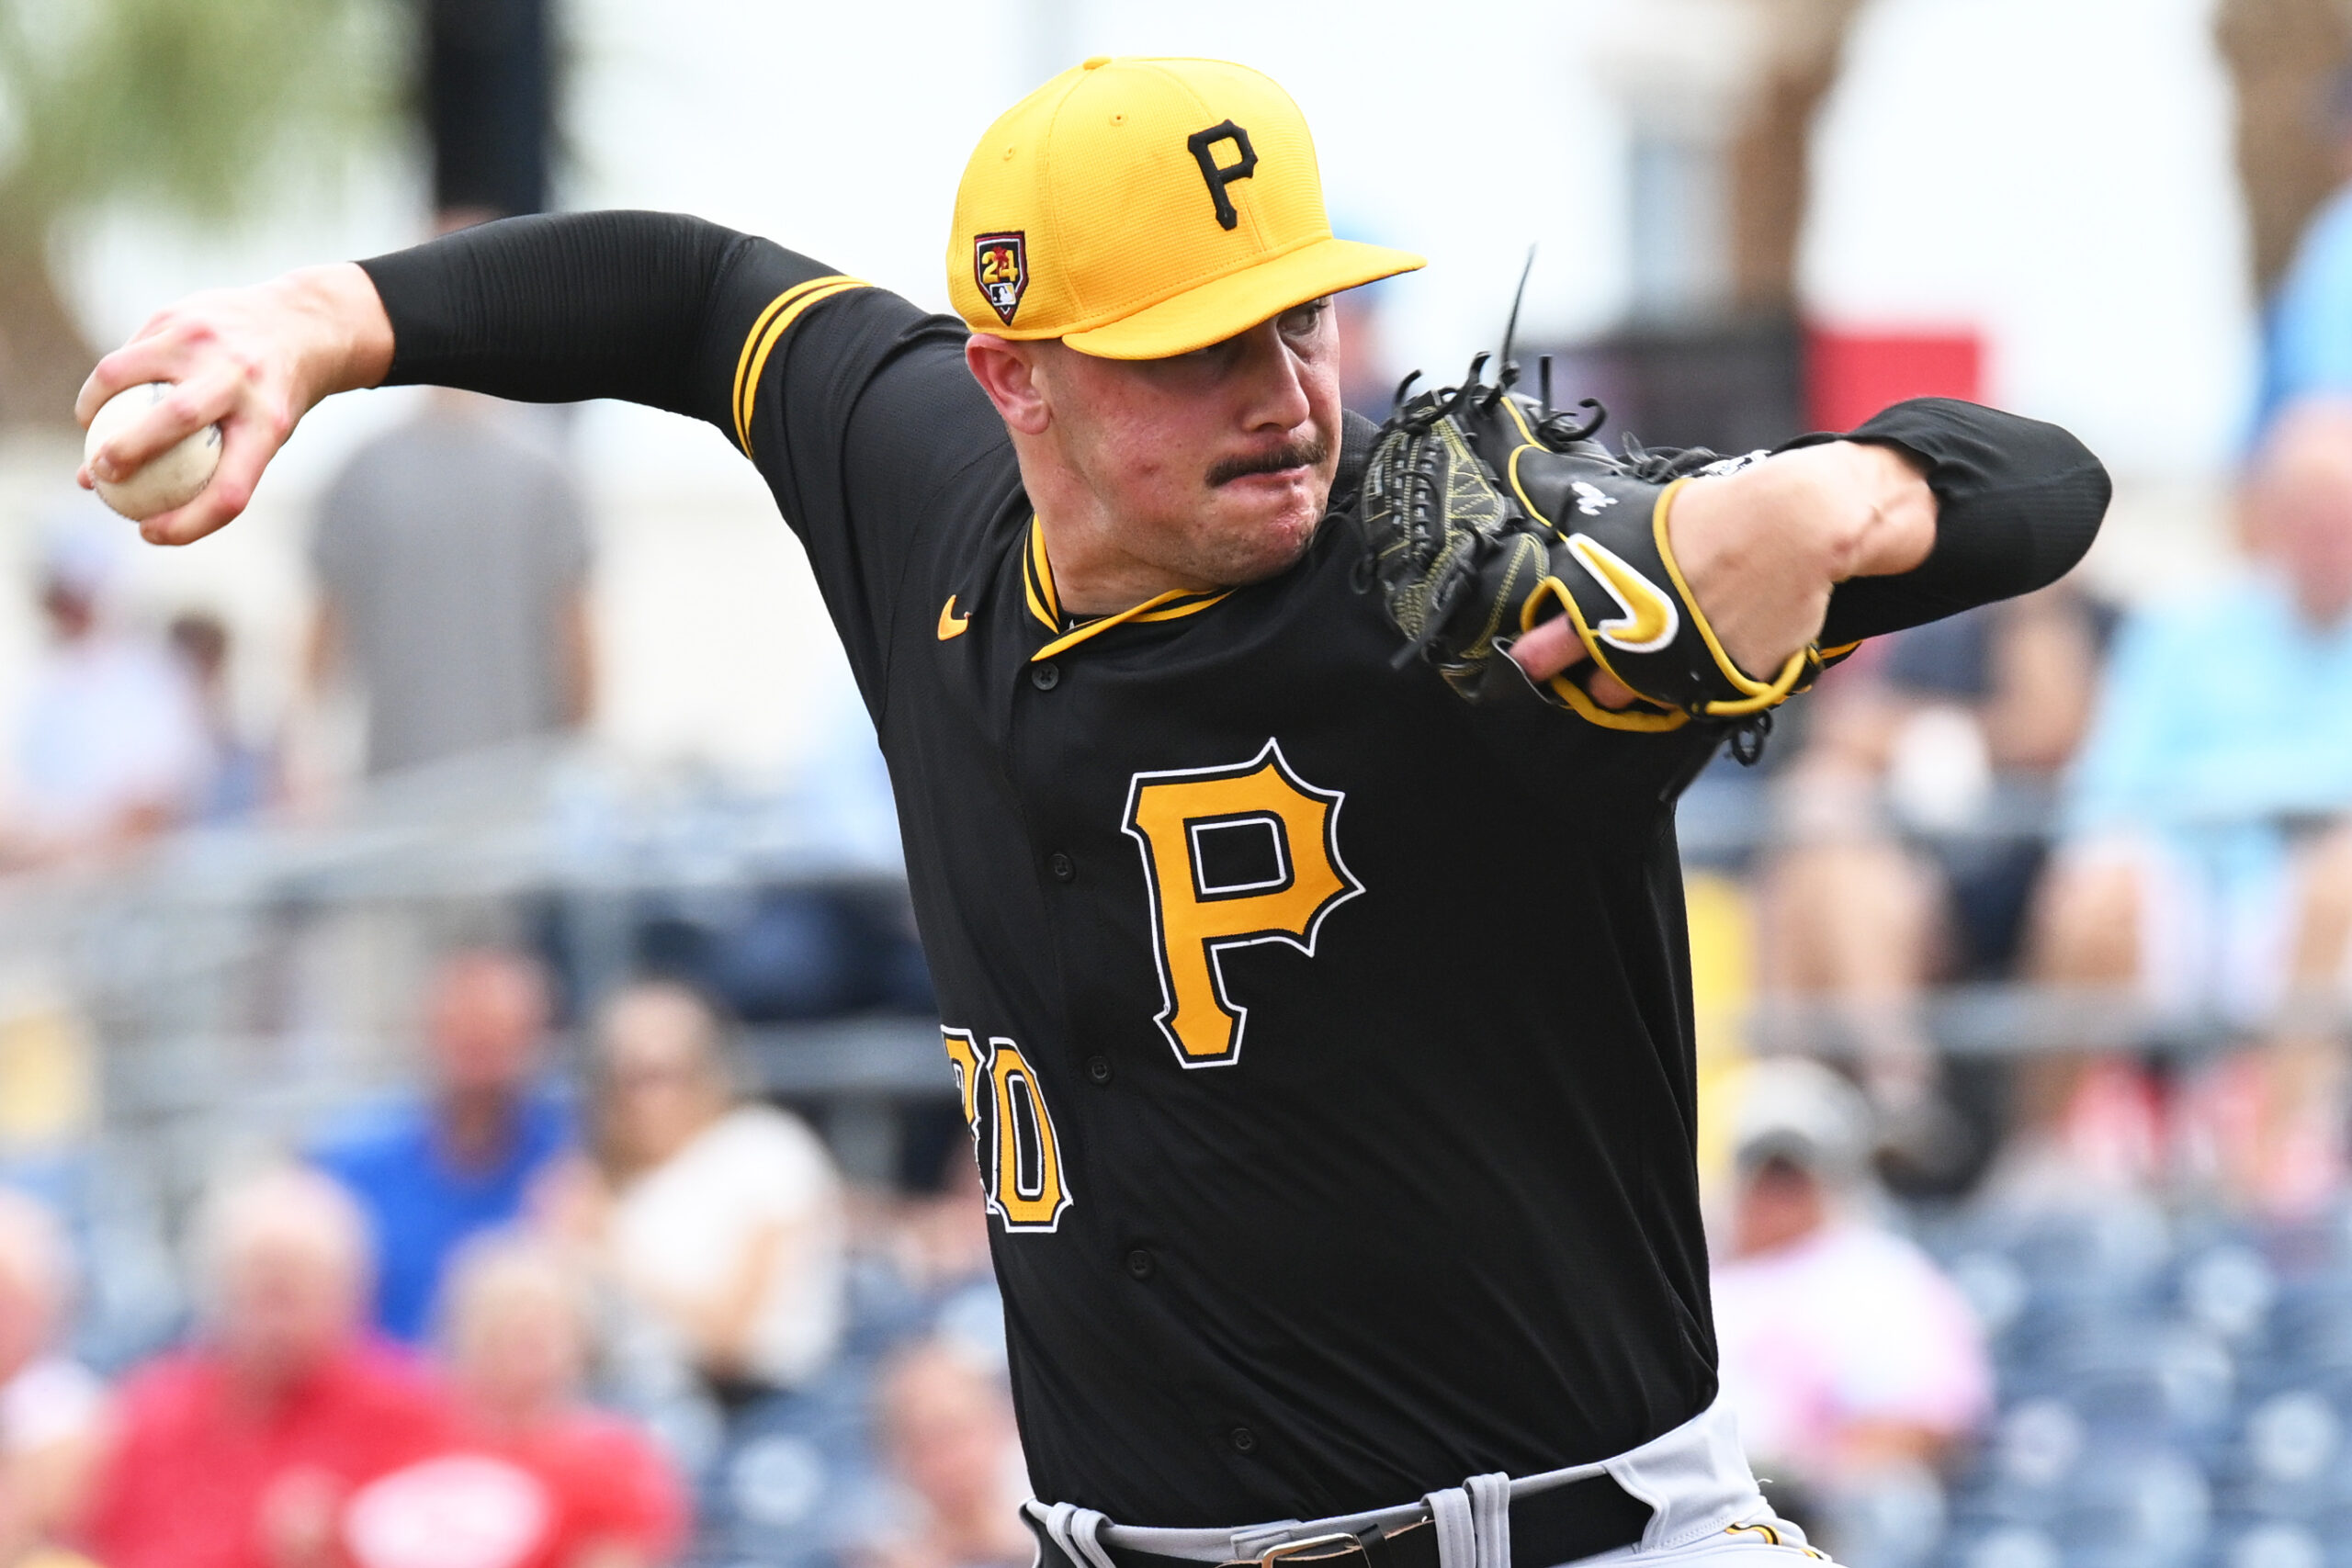 Pirates Call Up Top Prospect for Saturday Debut